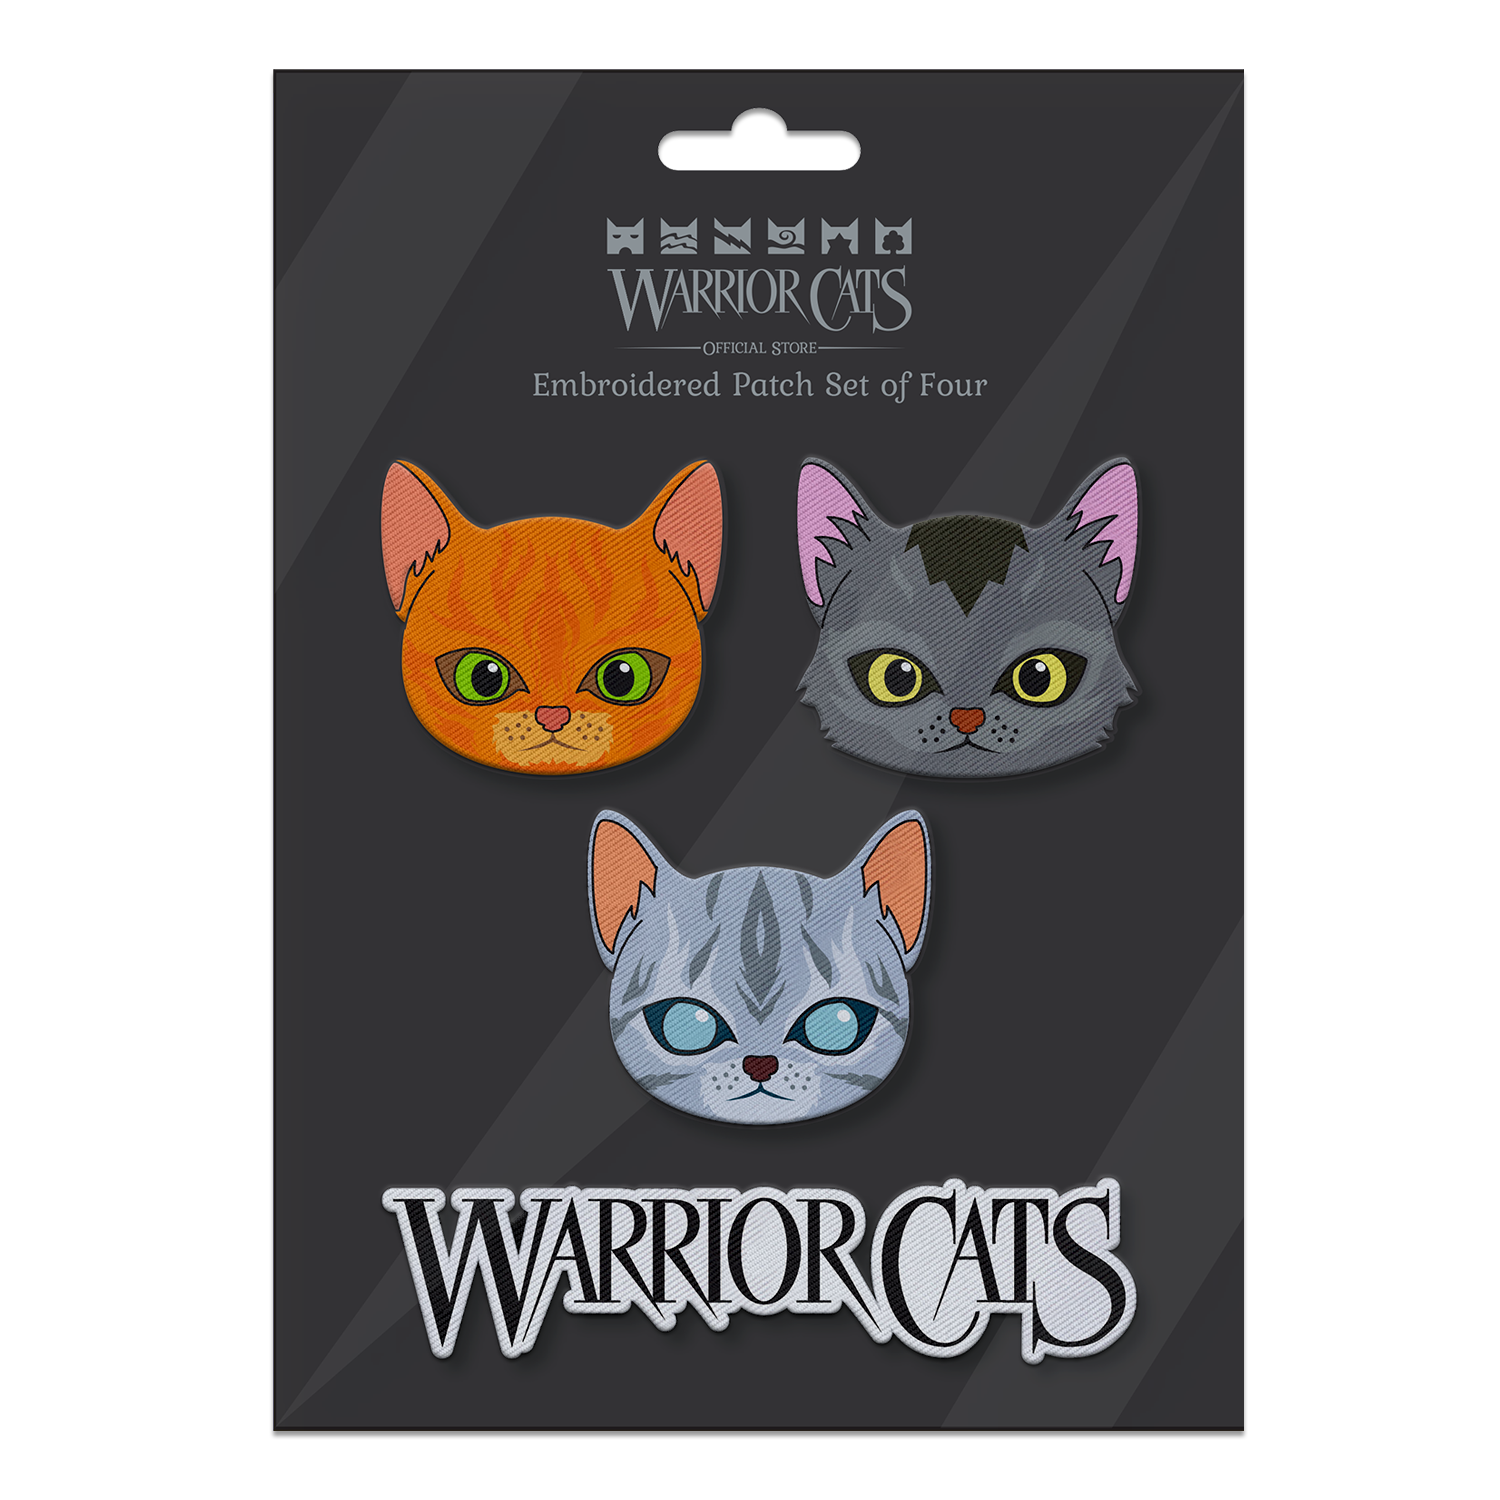 Four Cats & Warrior Cats Logo - Embroidered Patch Set